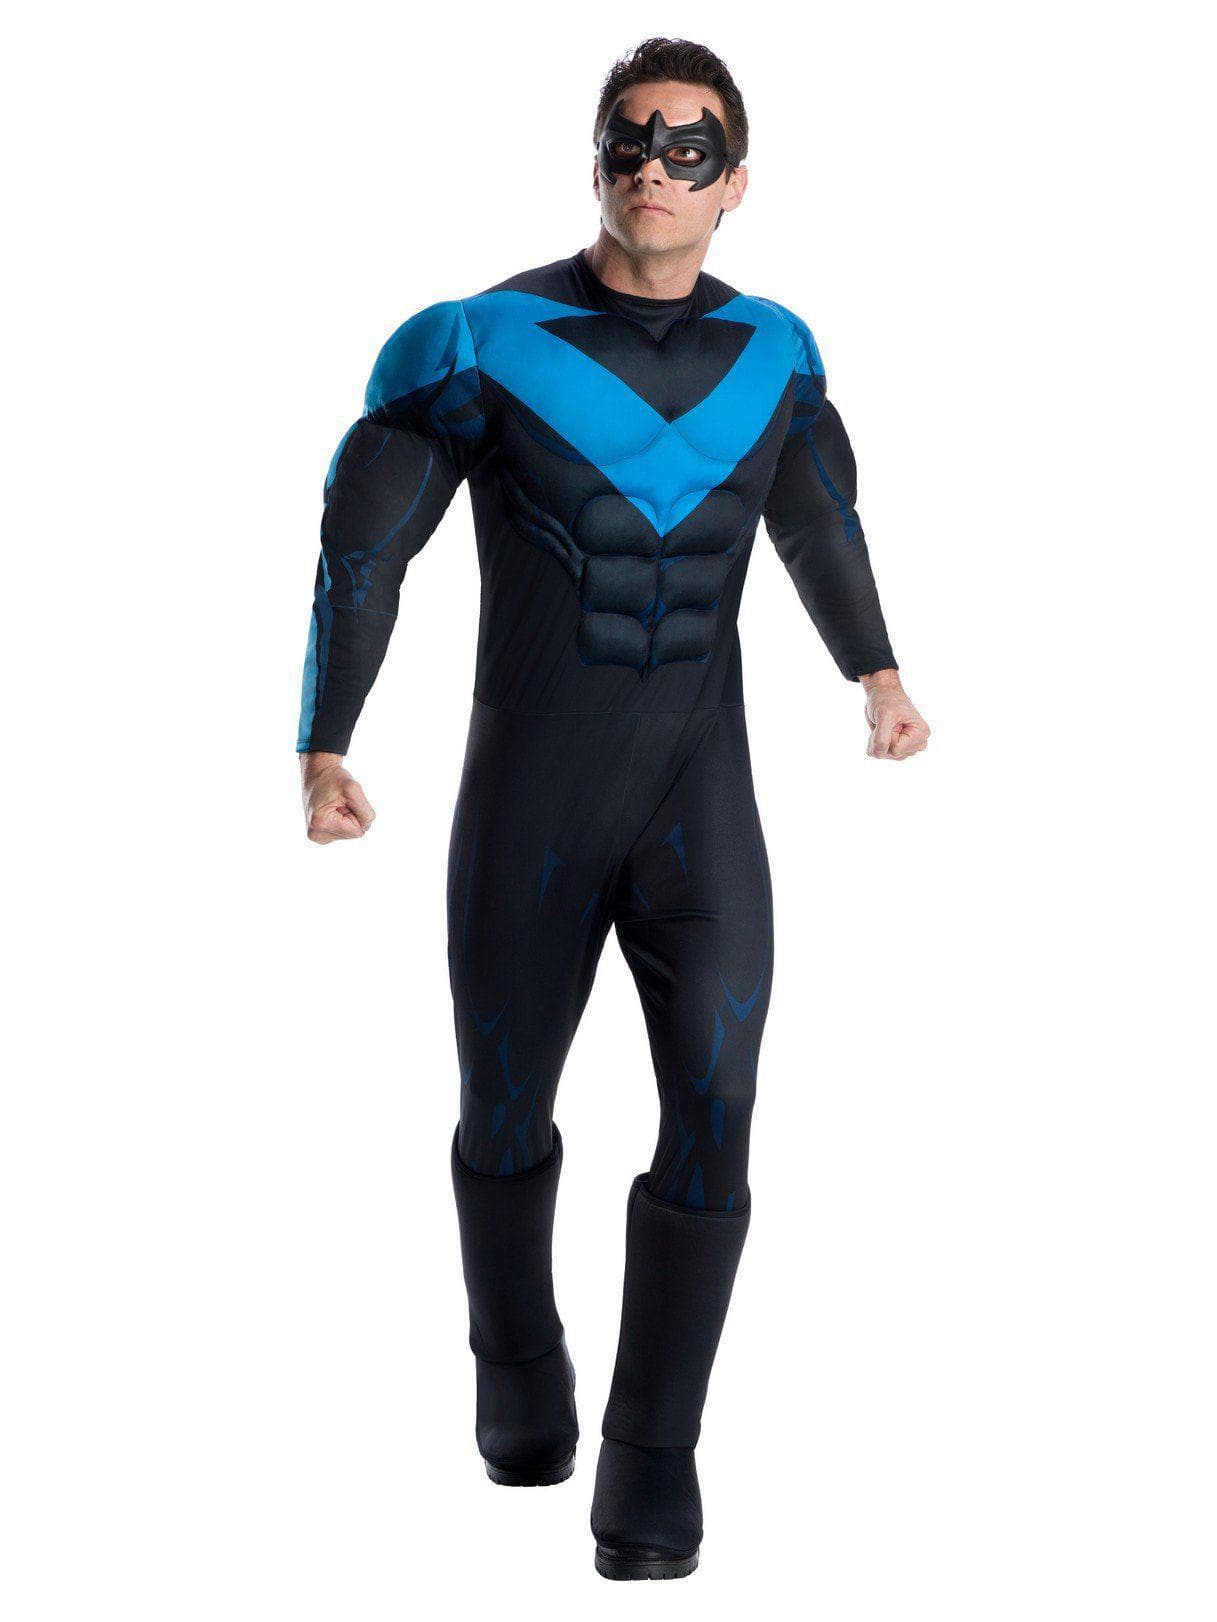 Adult DC Comics Nightwing Deluxe Costume - costumes.com